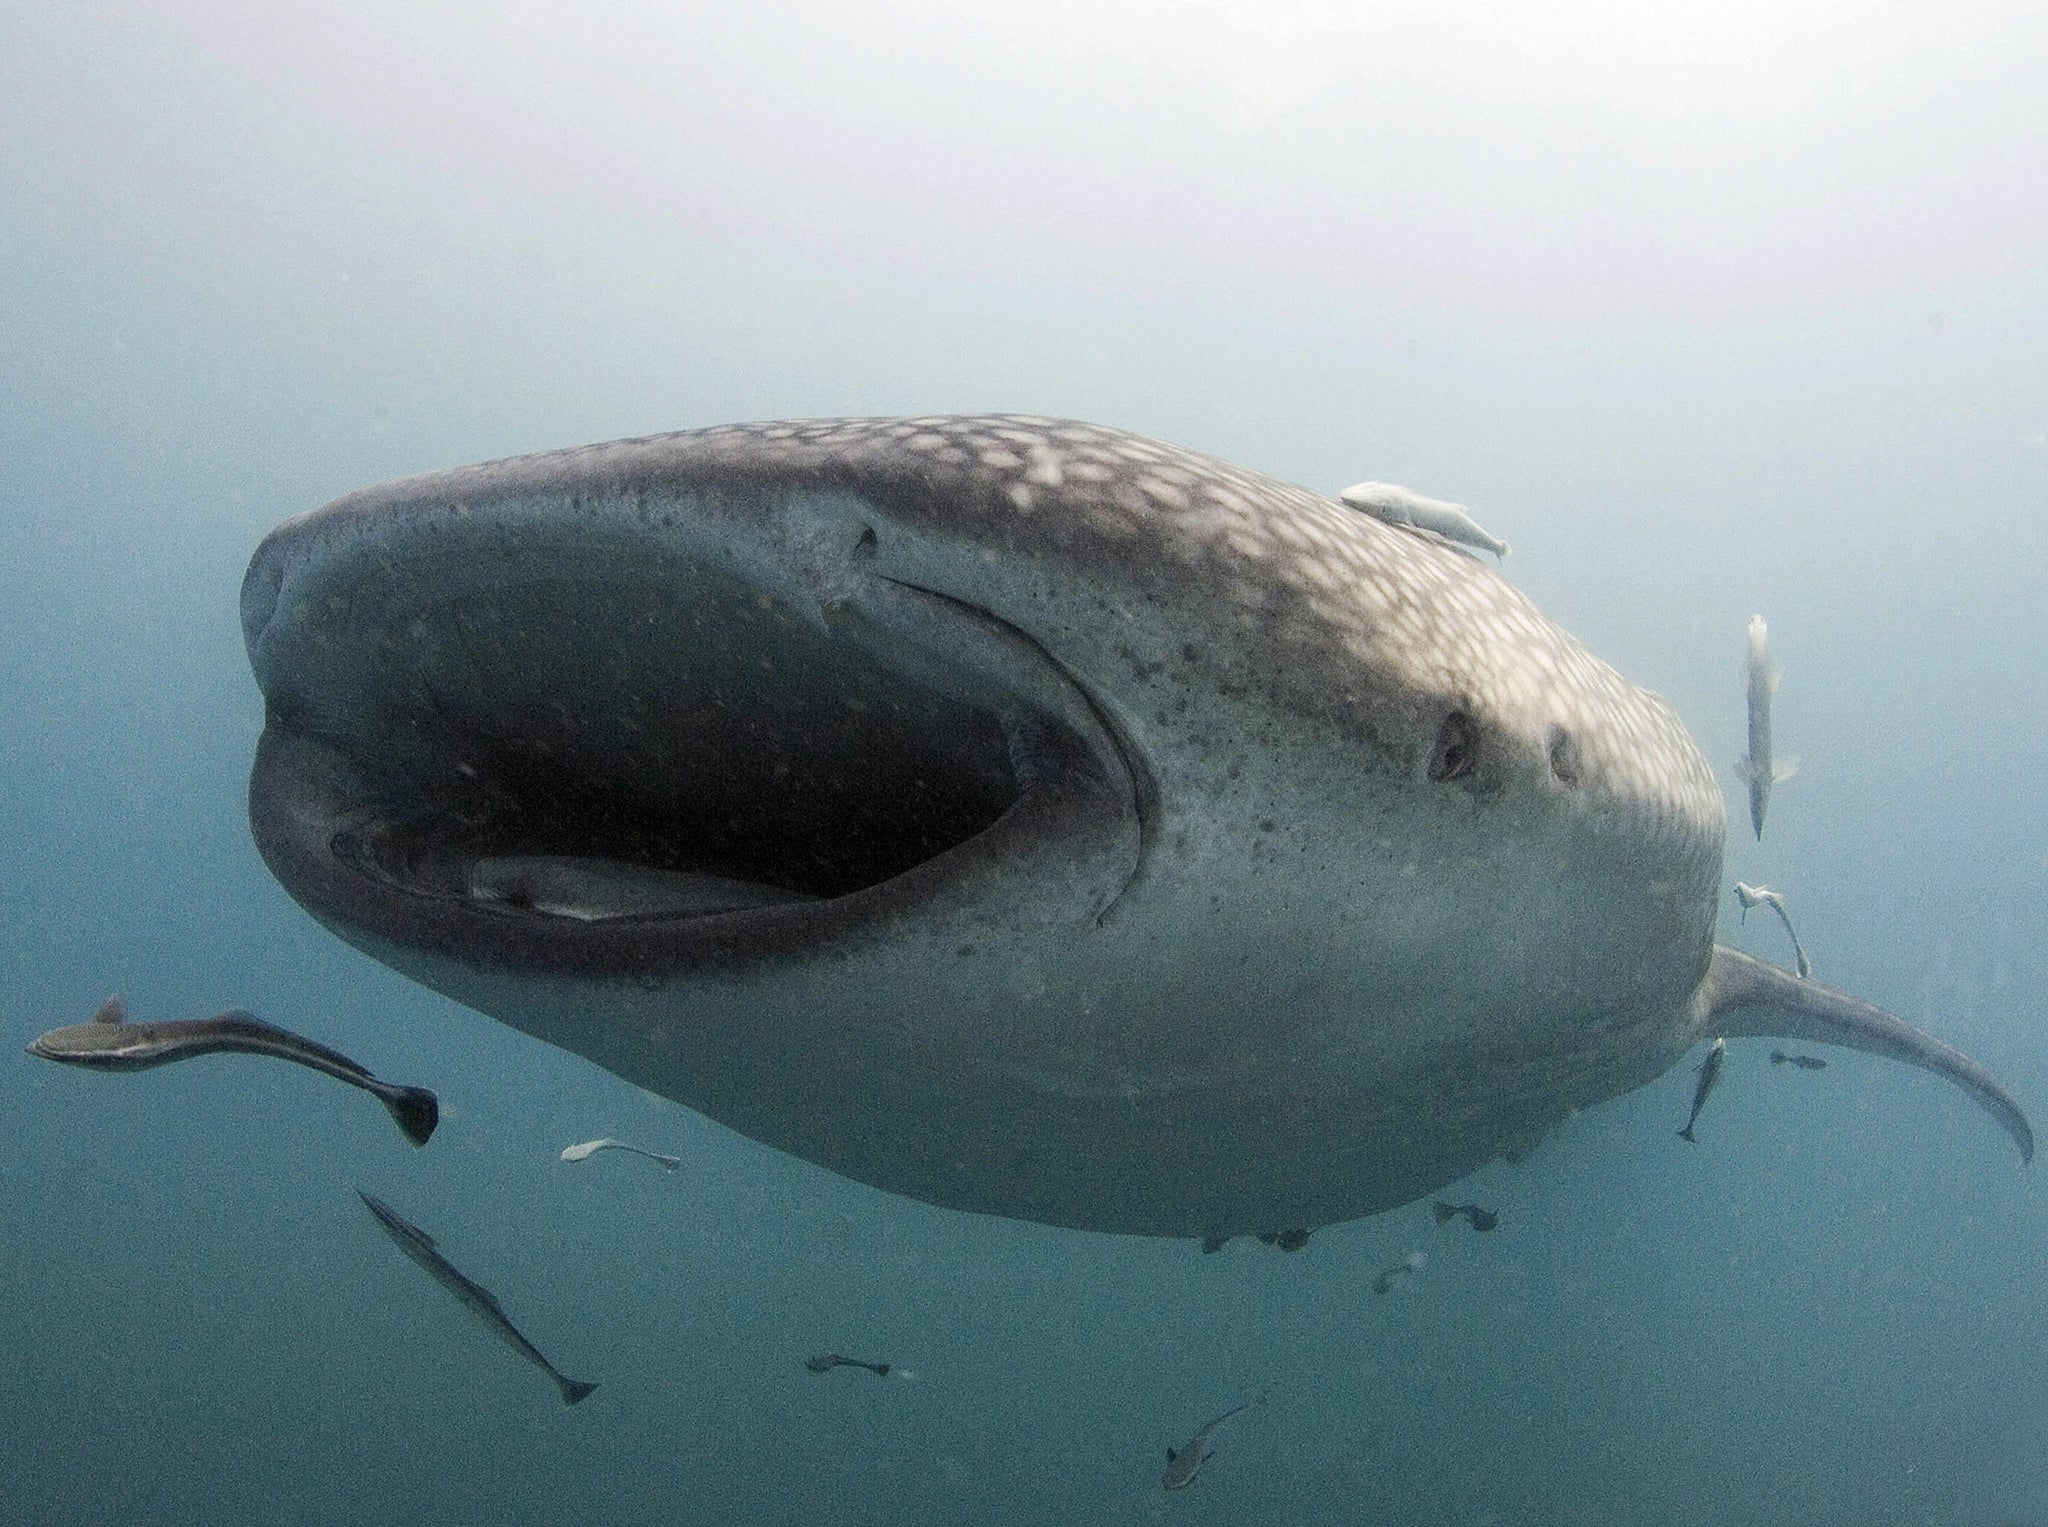 Filter feeders like this six-metre whale shark, depend on plankton for food